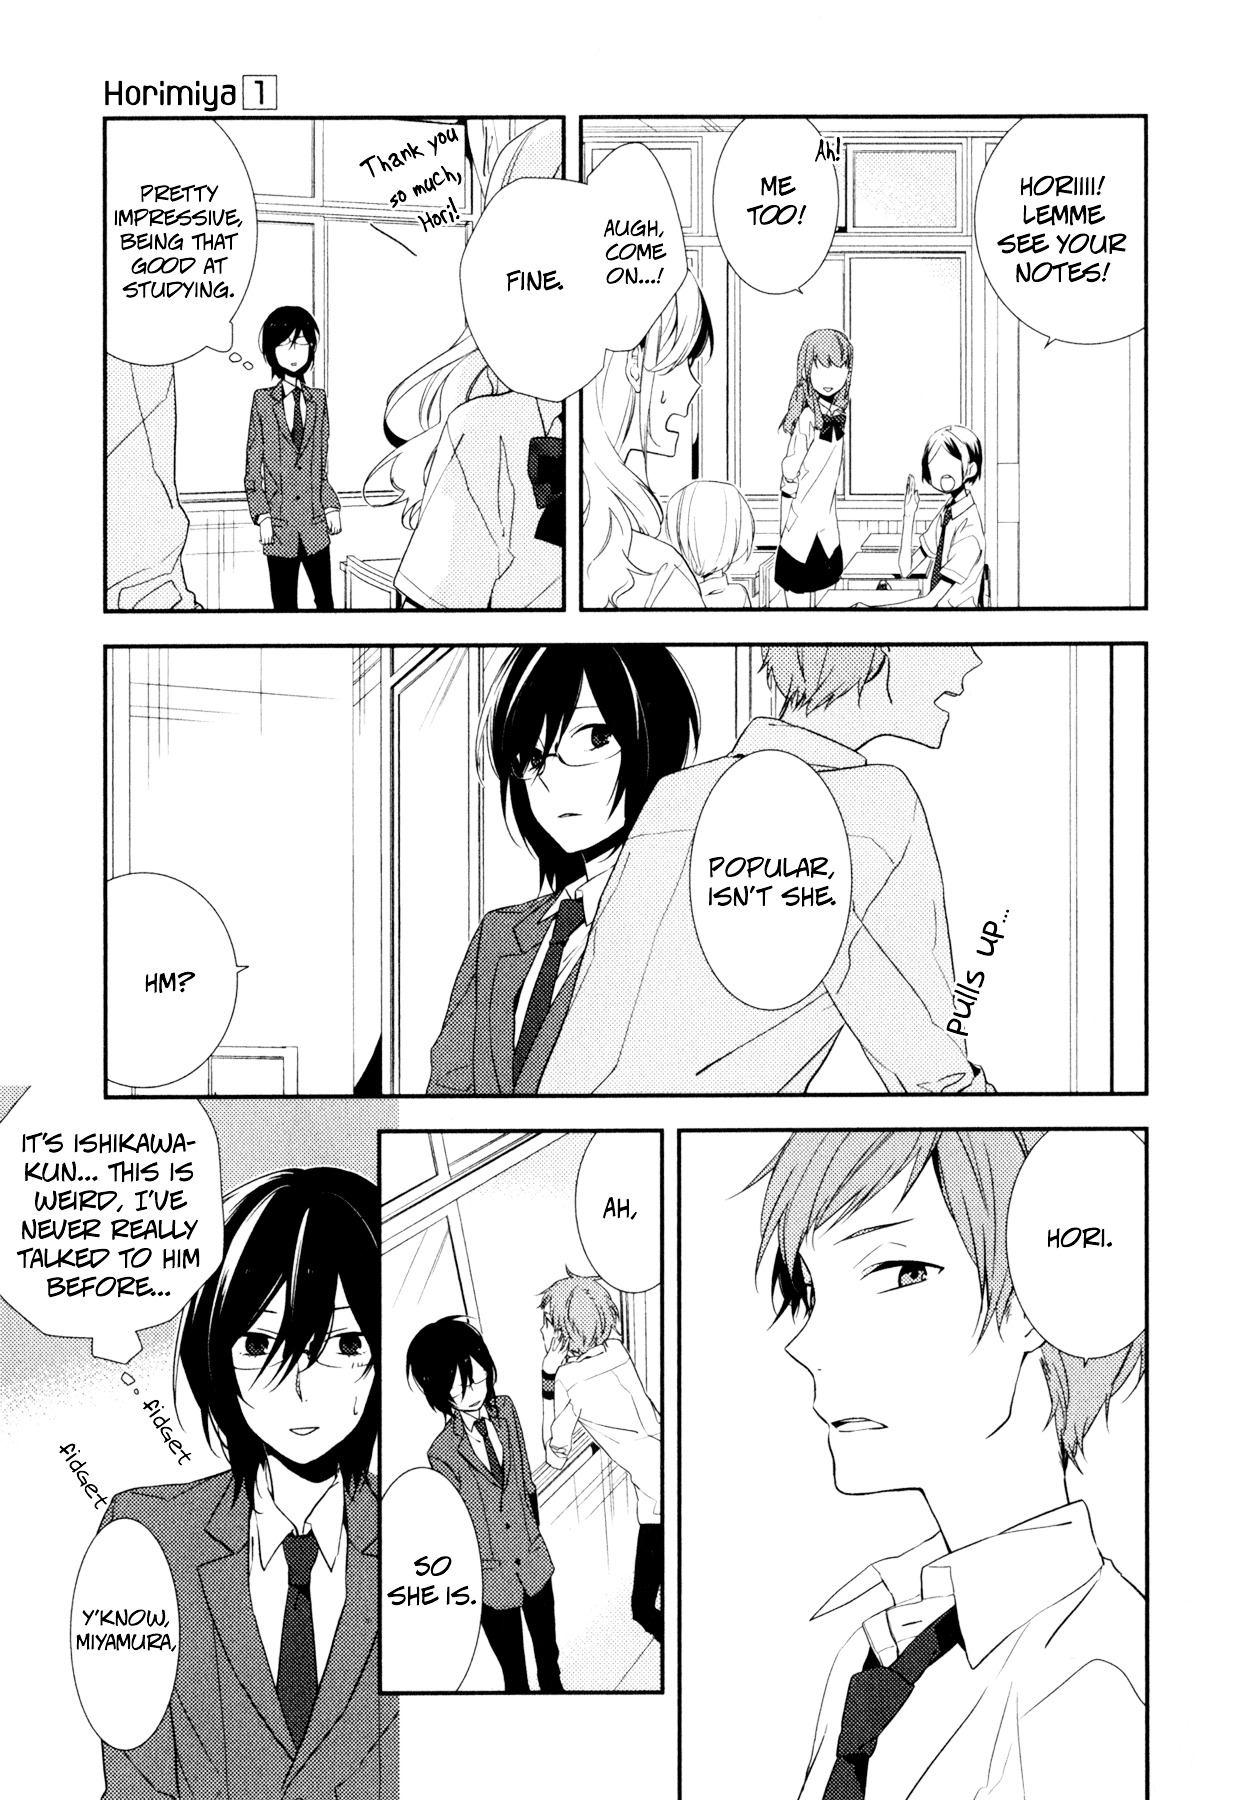 Horimiya Chapter 3 : Page 3 - Picture 3